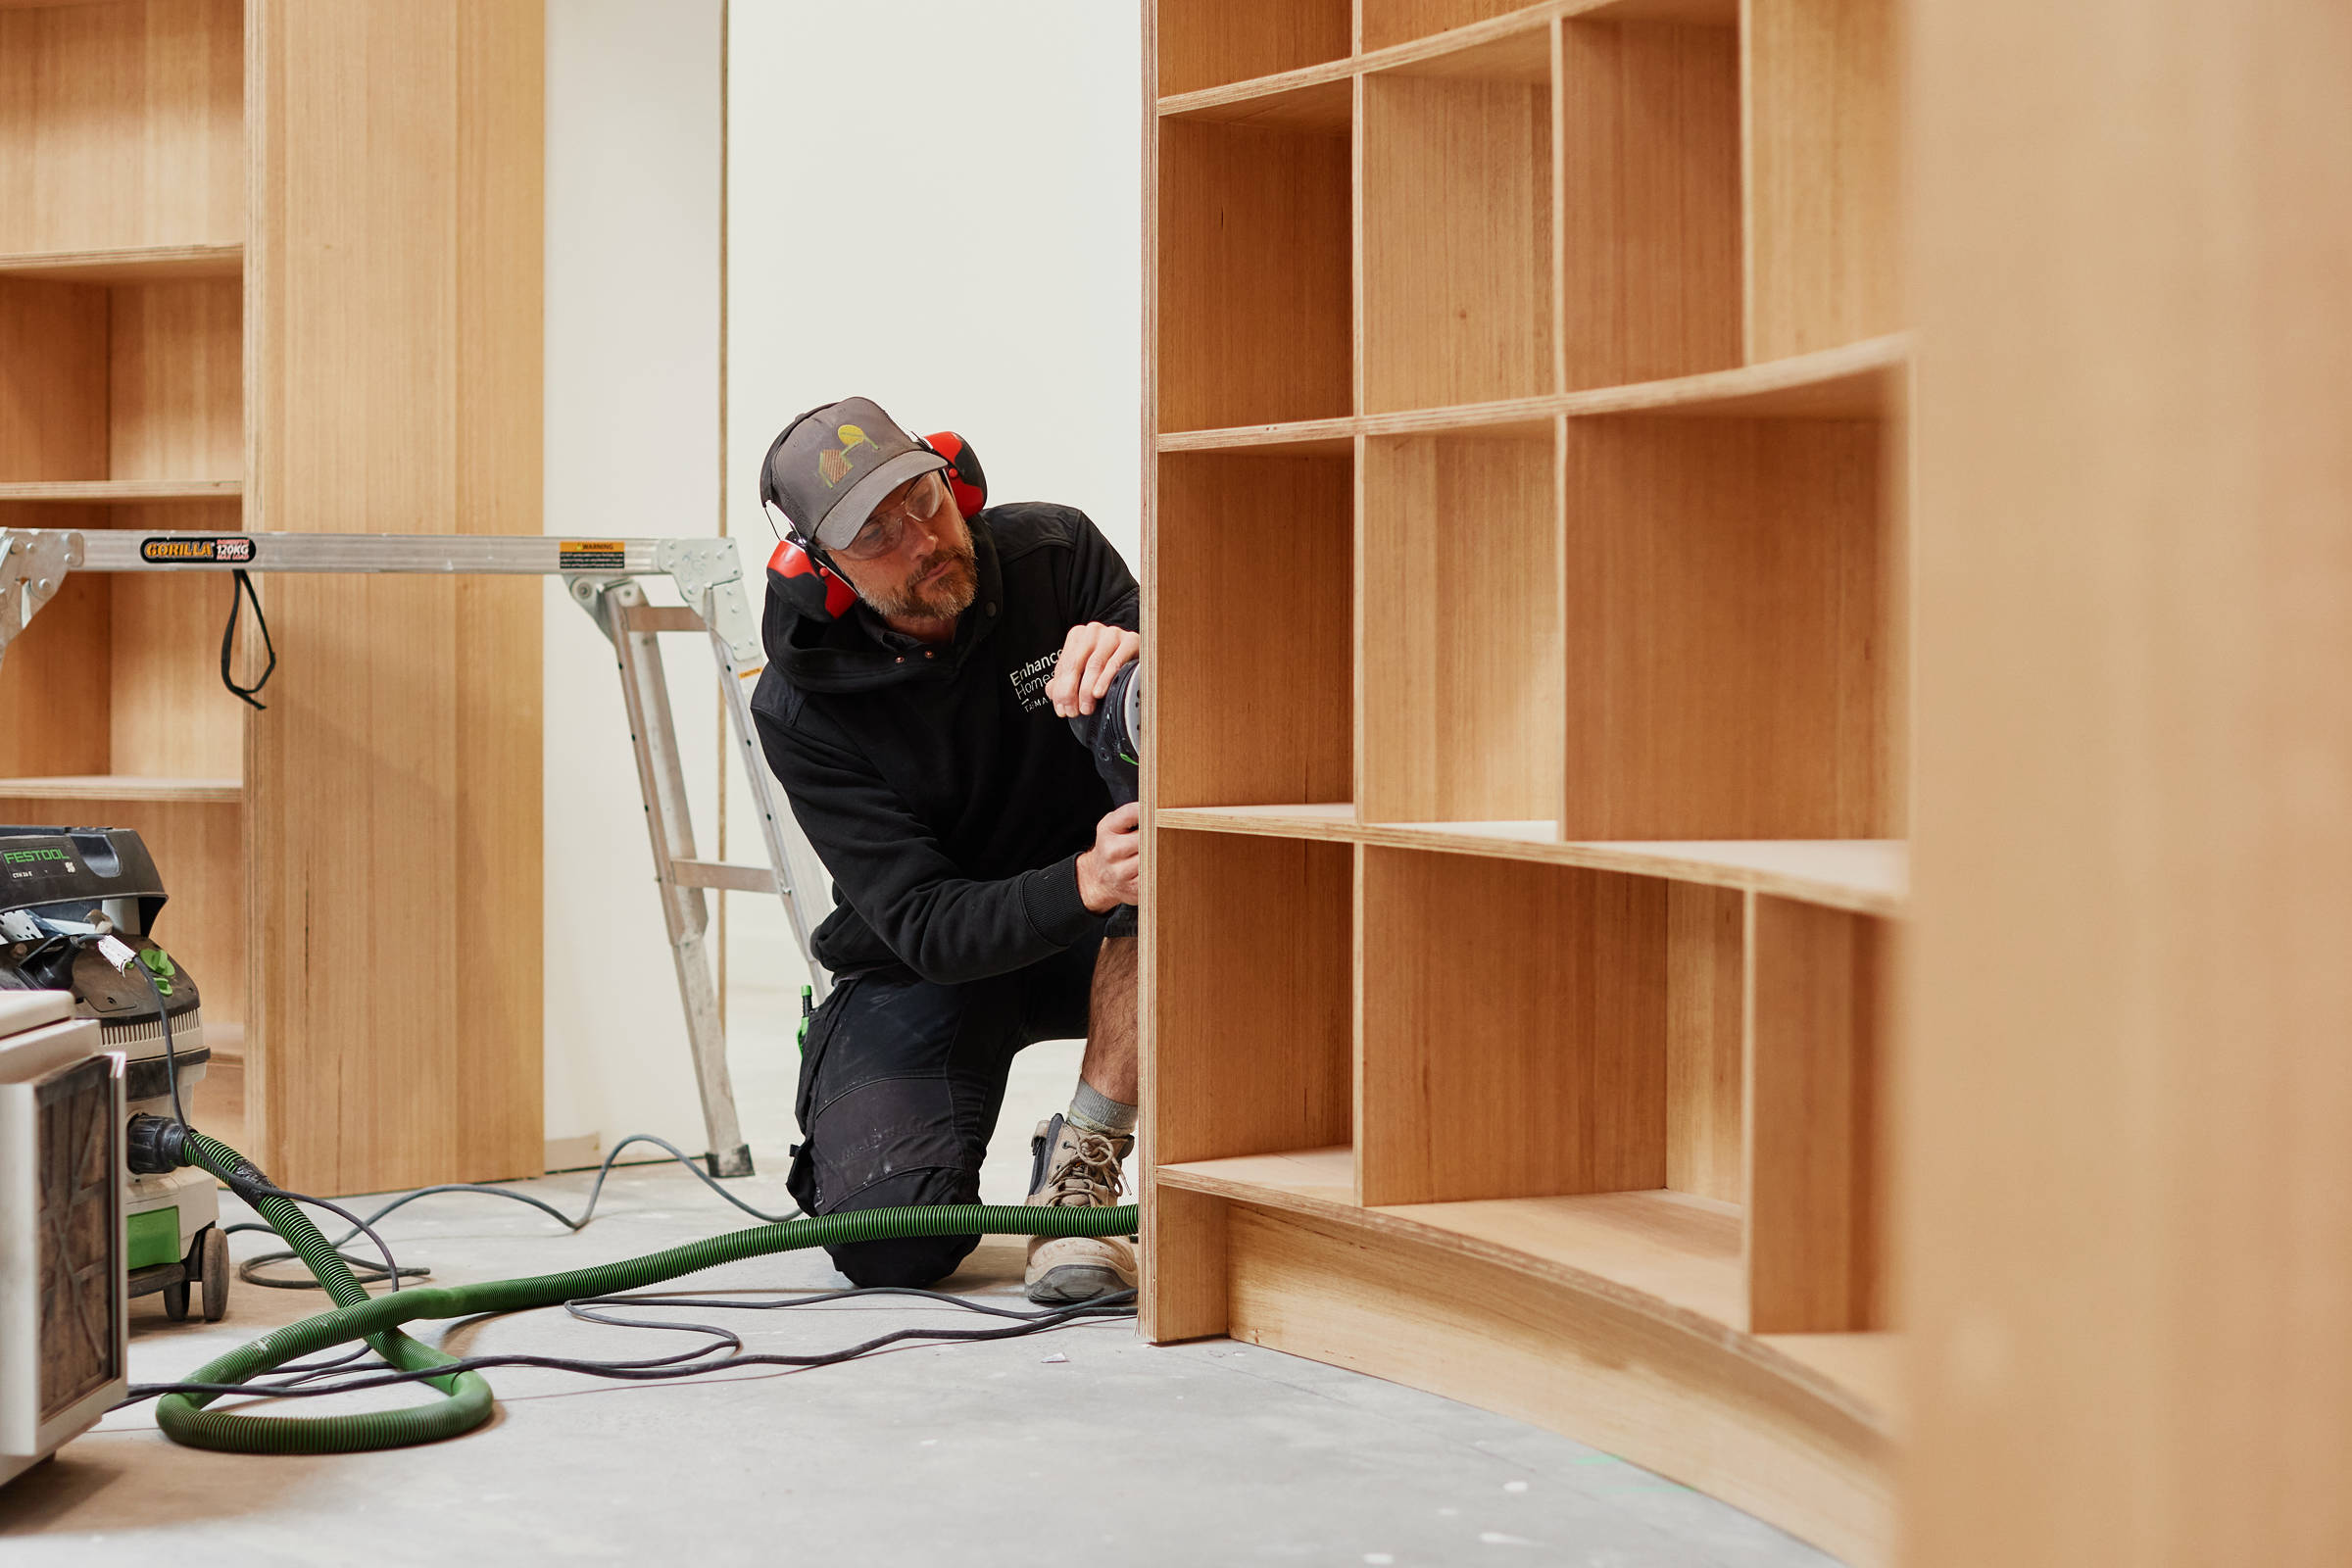 A male carpenter in his late 30s, doing detailed sanding work on the side of curved plywood bookshelves. Credit: Samuel Shelley.